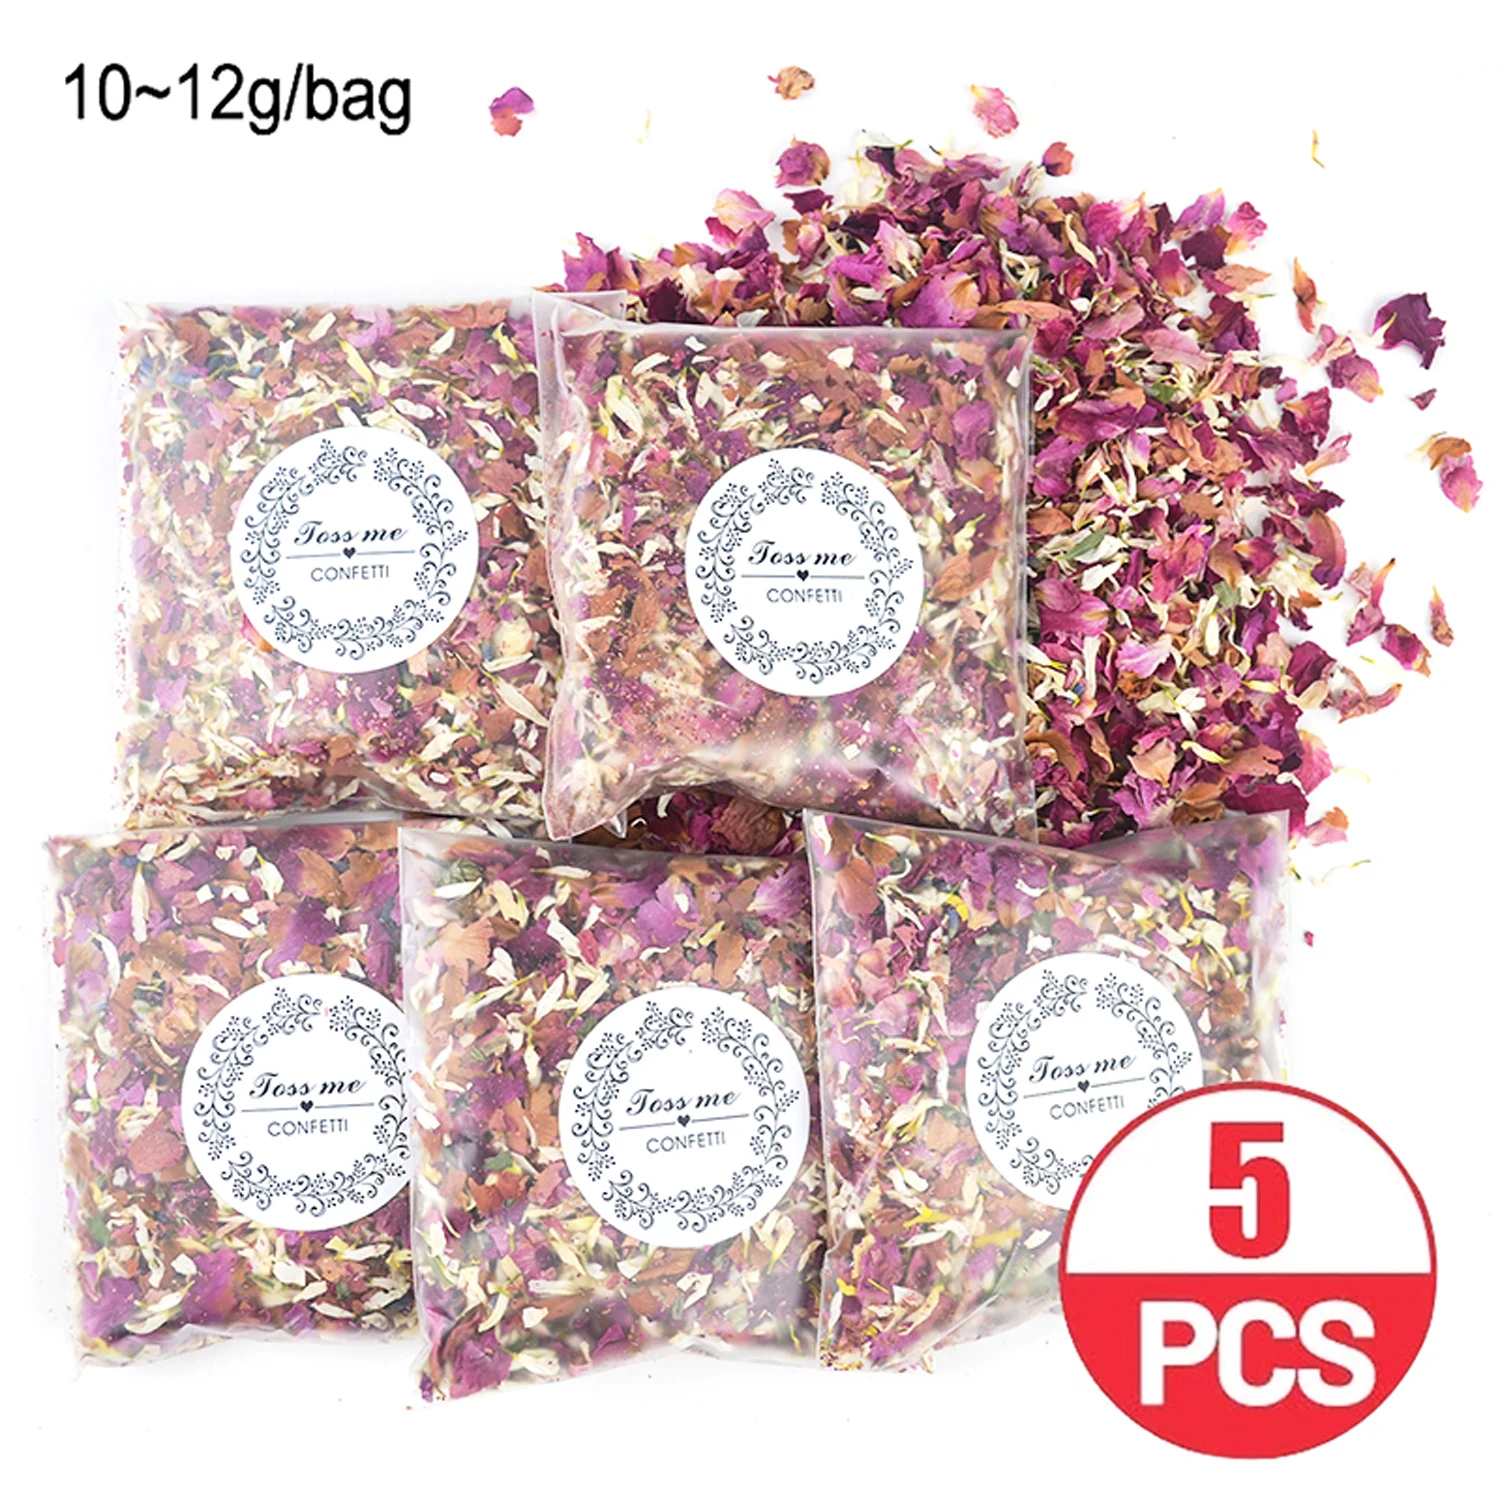 

50g Natural Dried Flower Rose Petals Pop Wedding Confetti Birthday Party DIY Decoration Biodegradable Handmade Party Accessories